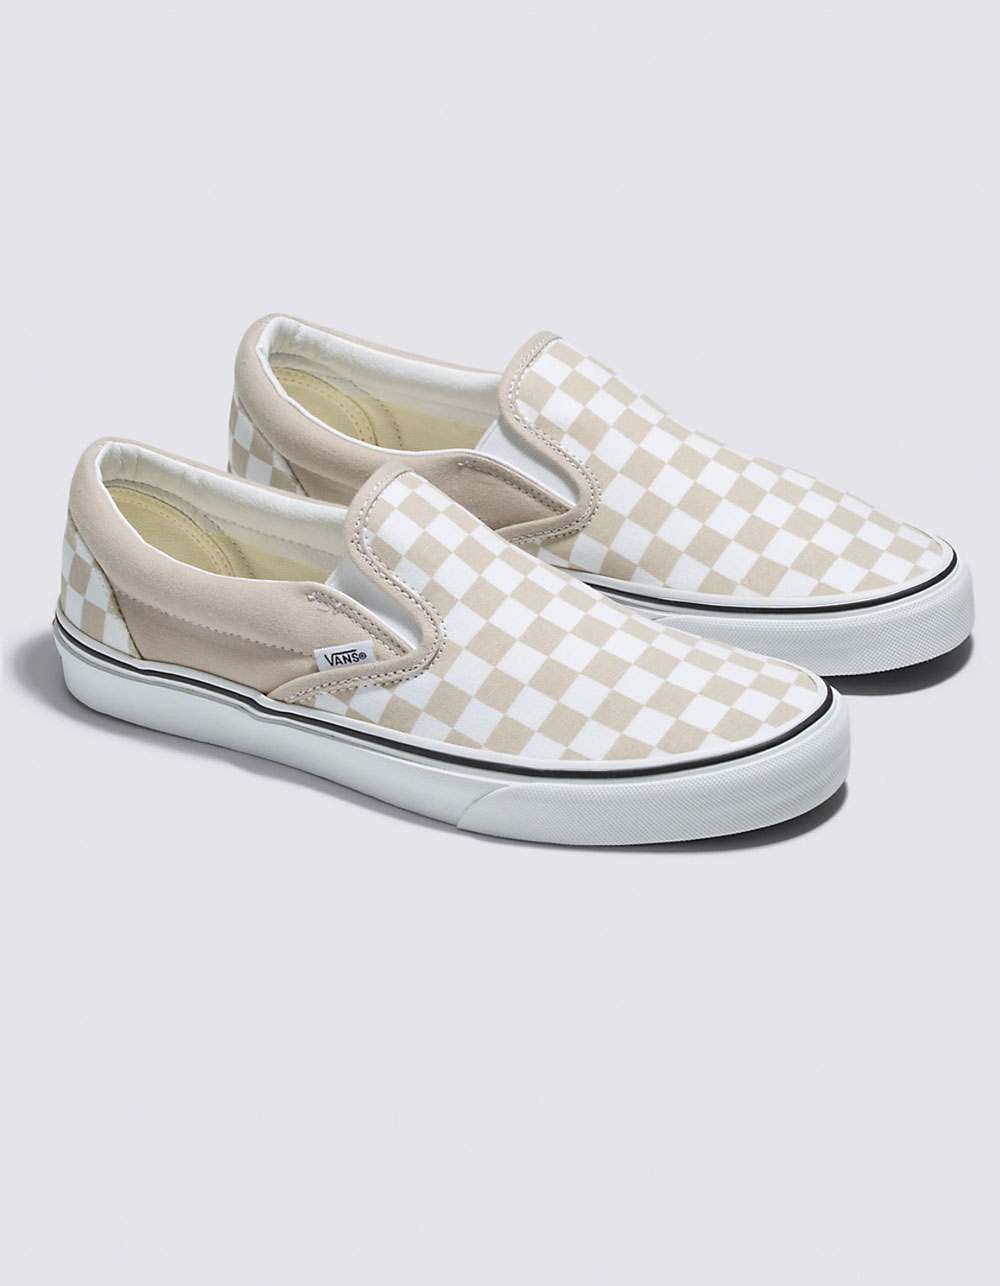 VANS Checkerboard Classic Slip-On Shoes - TAN | Tillys